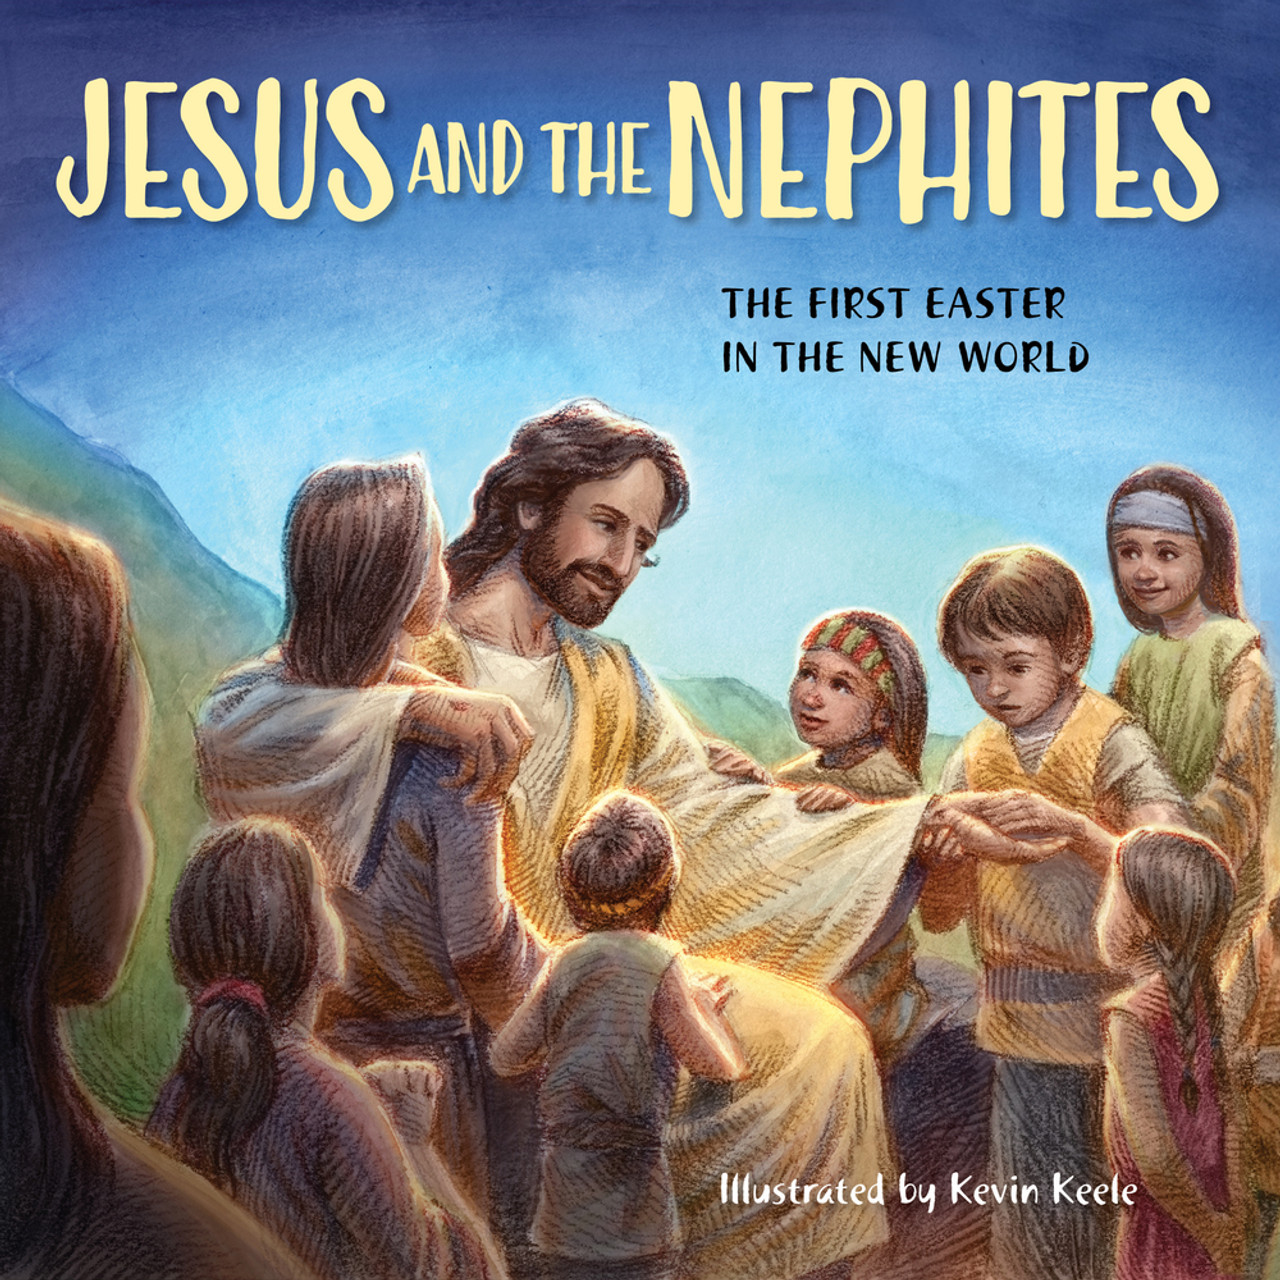 Jesus and the Nephites: The First Easter in the New World (Hardcover)